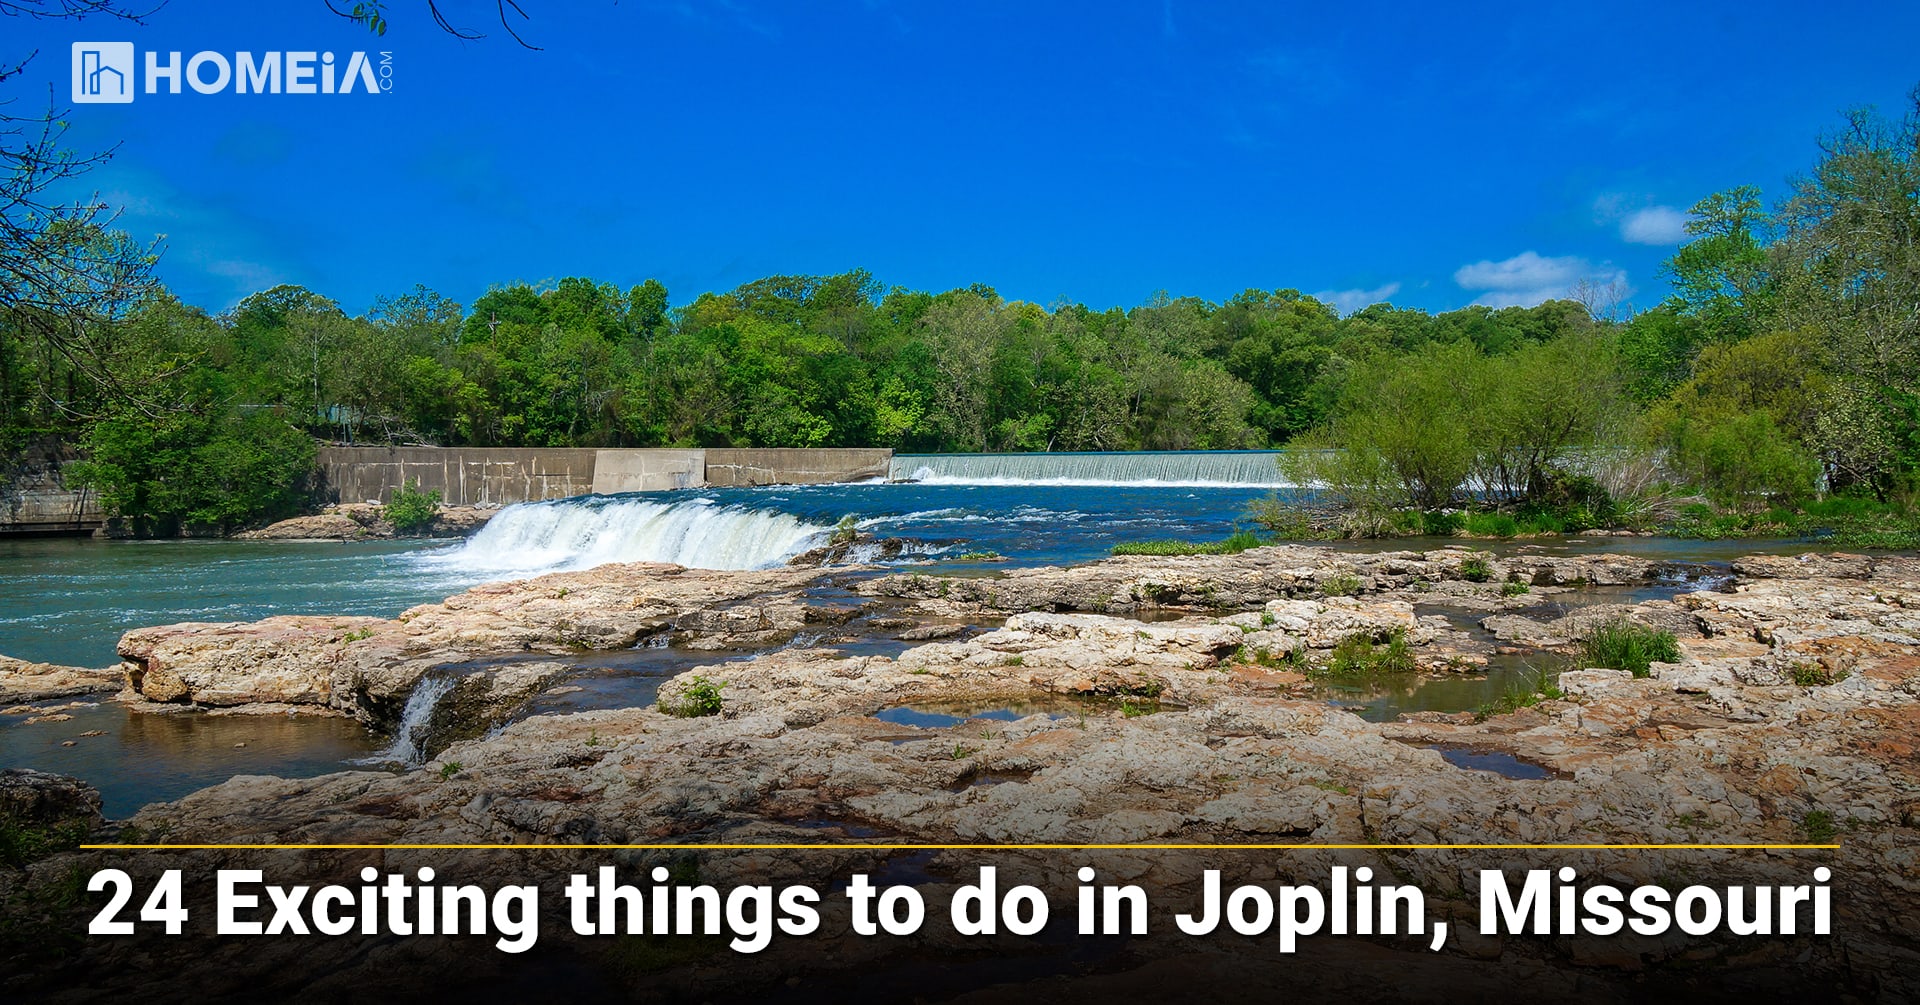 24 Exciting things to do in Joplin, Missouri